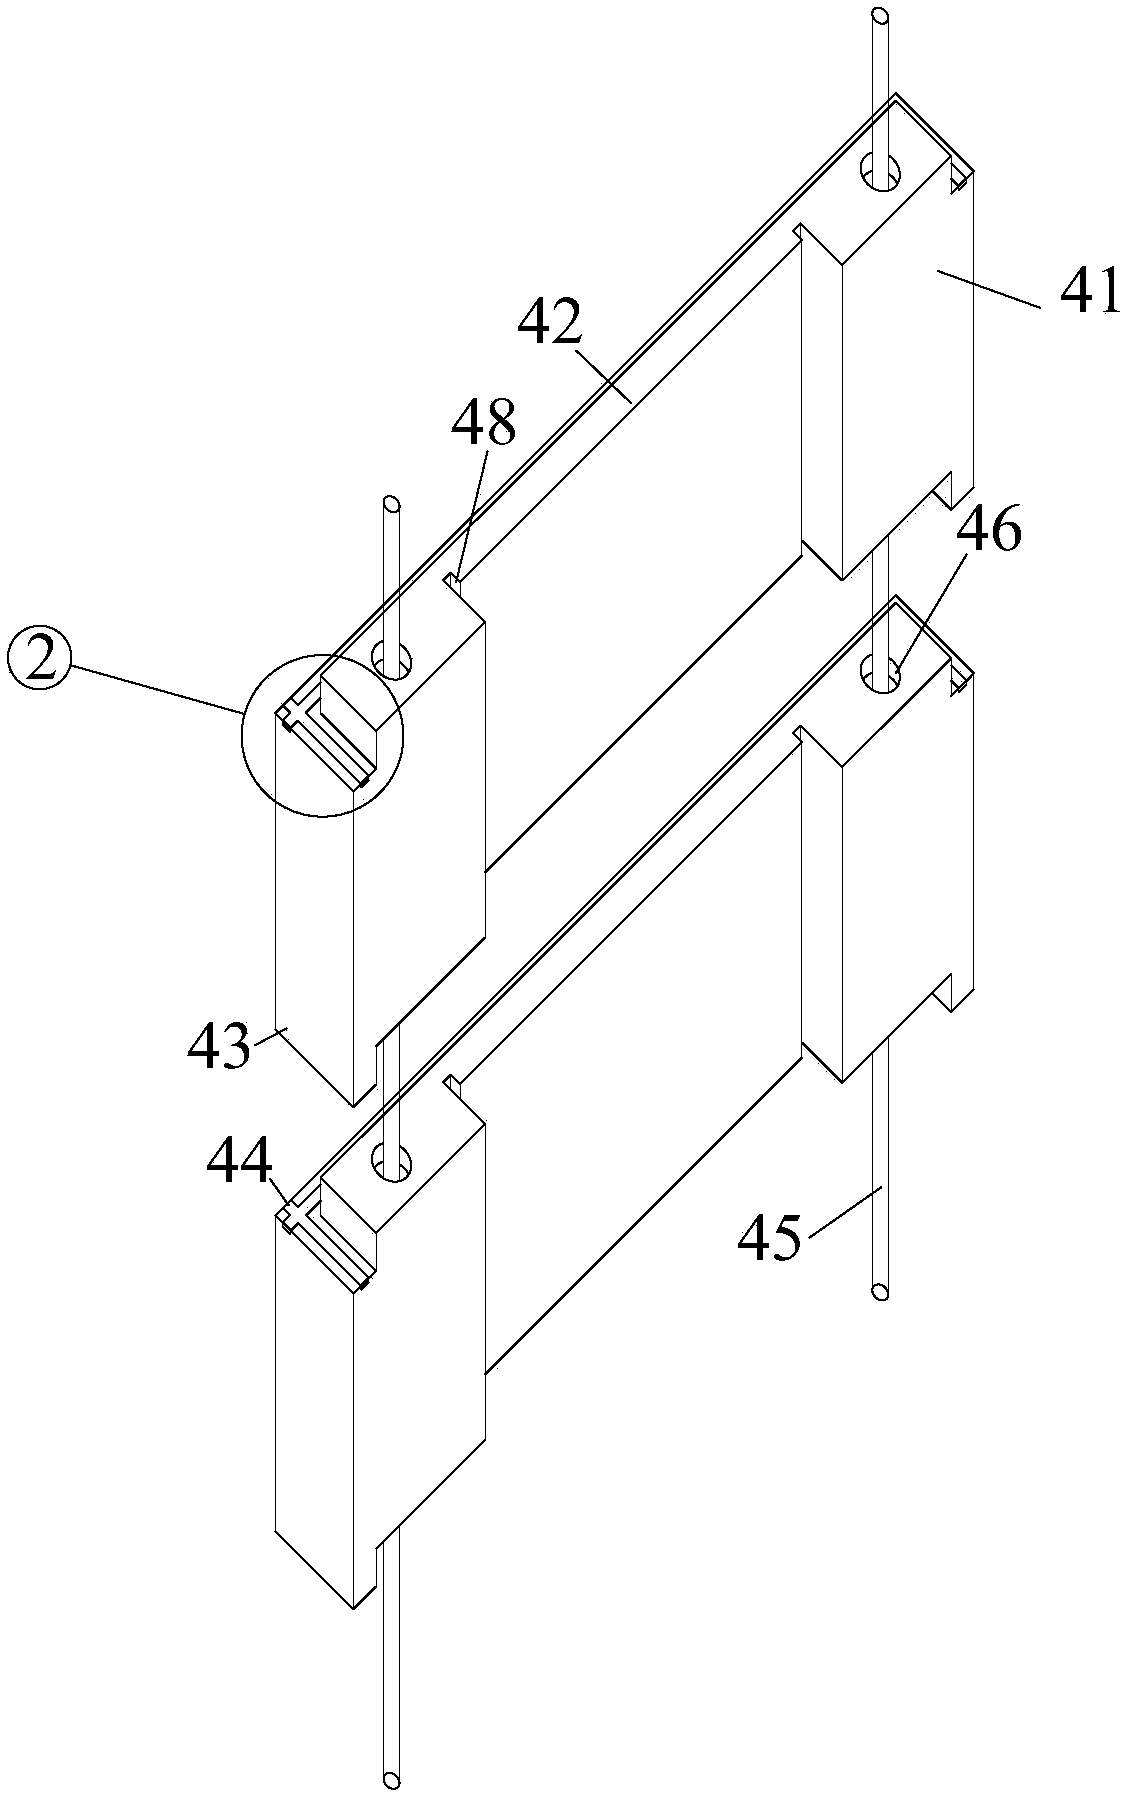 Advance closed structure and construction method of post-cast belt on basement exterior wall